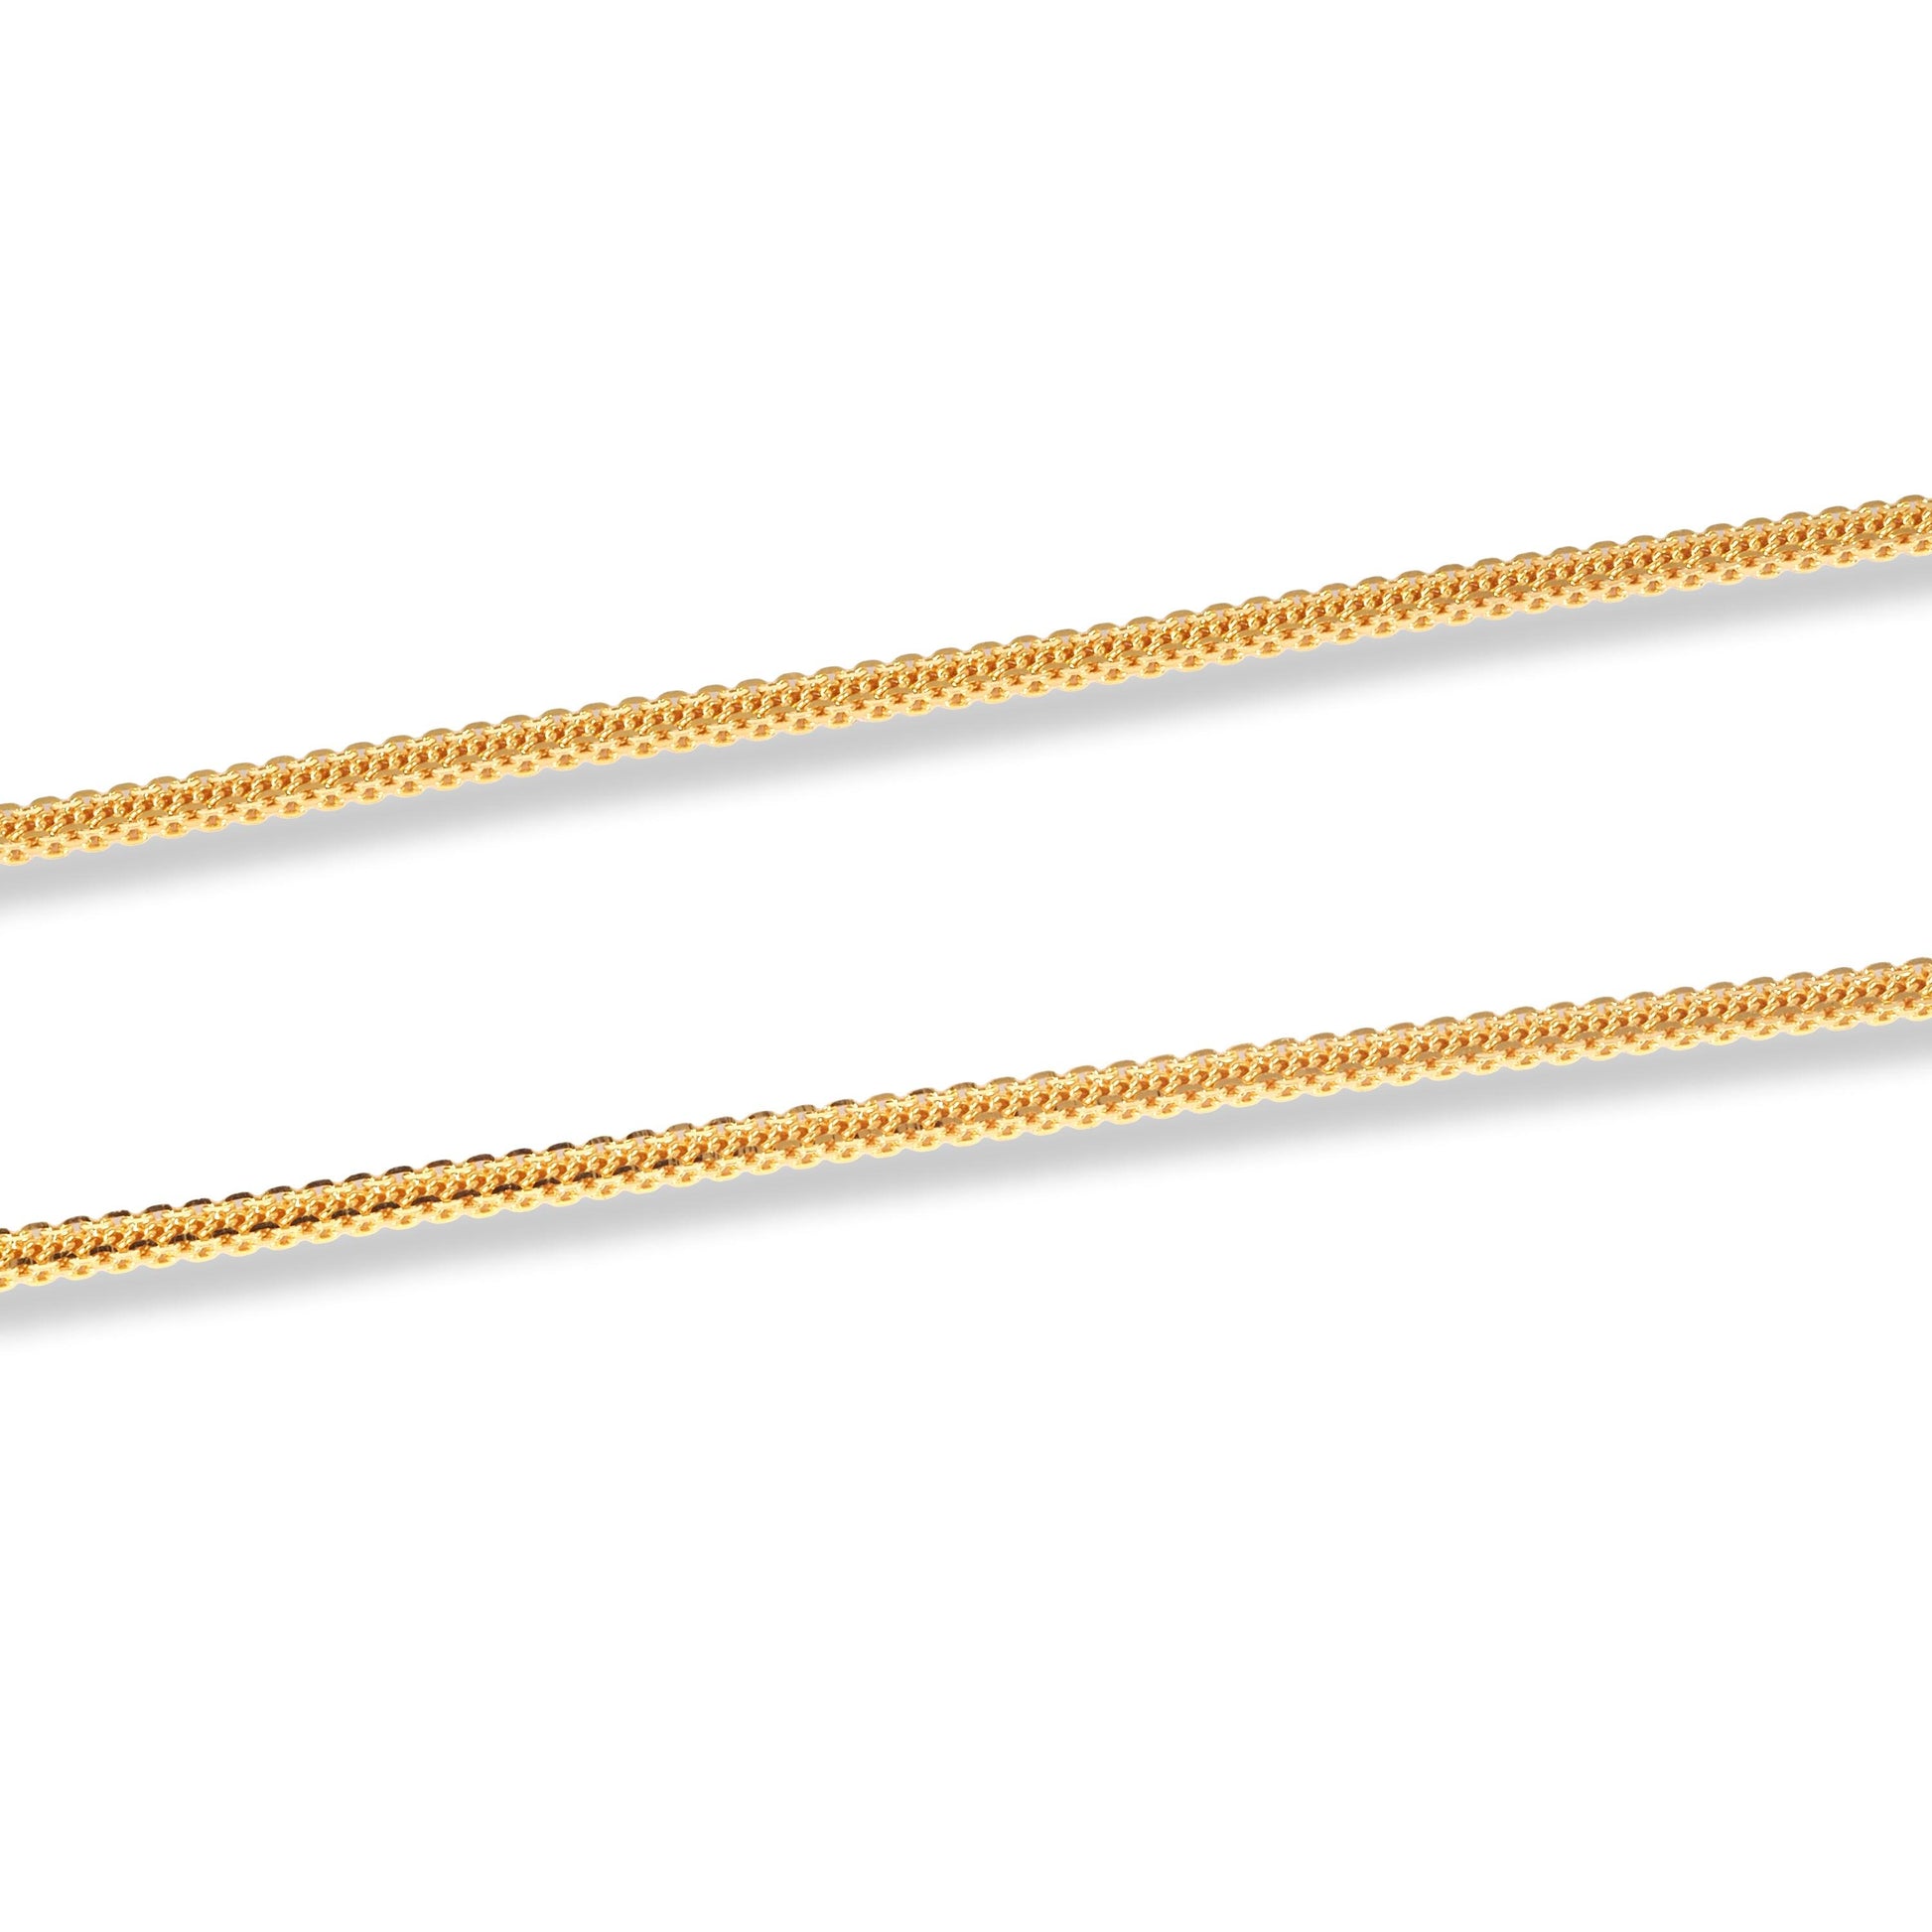 22ct Gold Fancy Dovetail Chain with Lobster Clasp C-7134 - Minar Jewellers